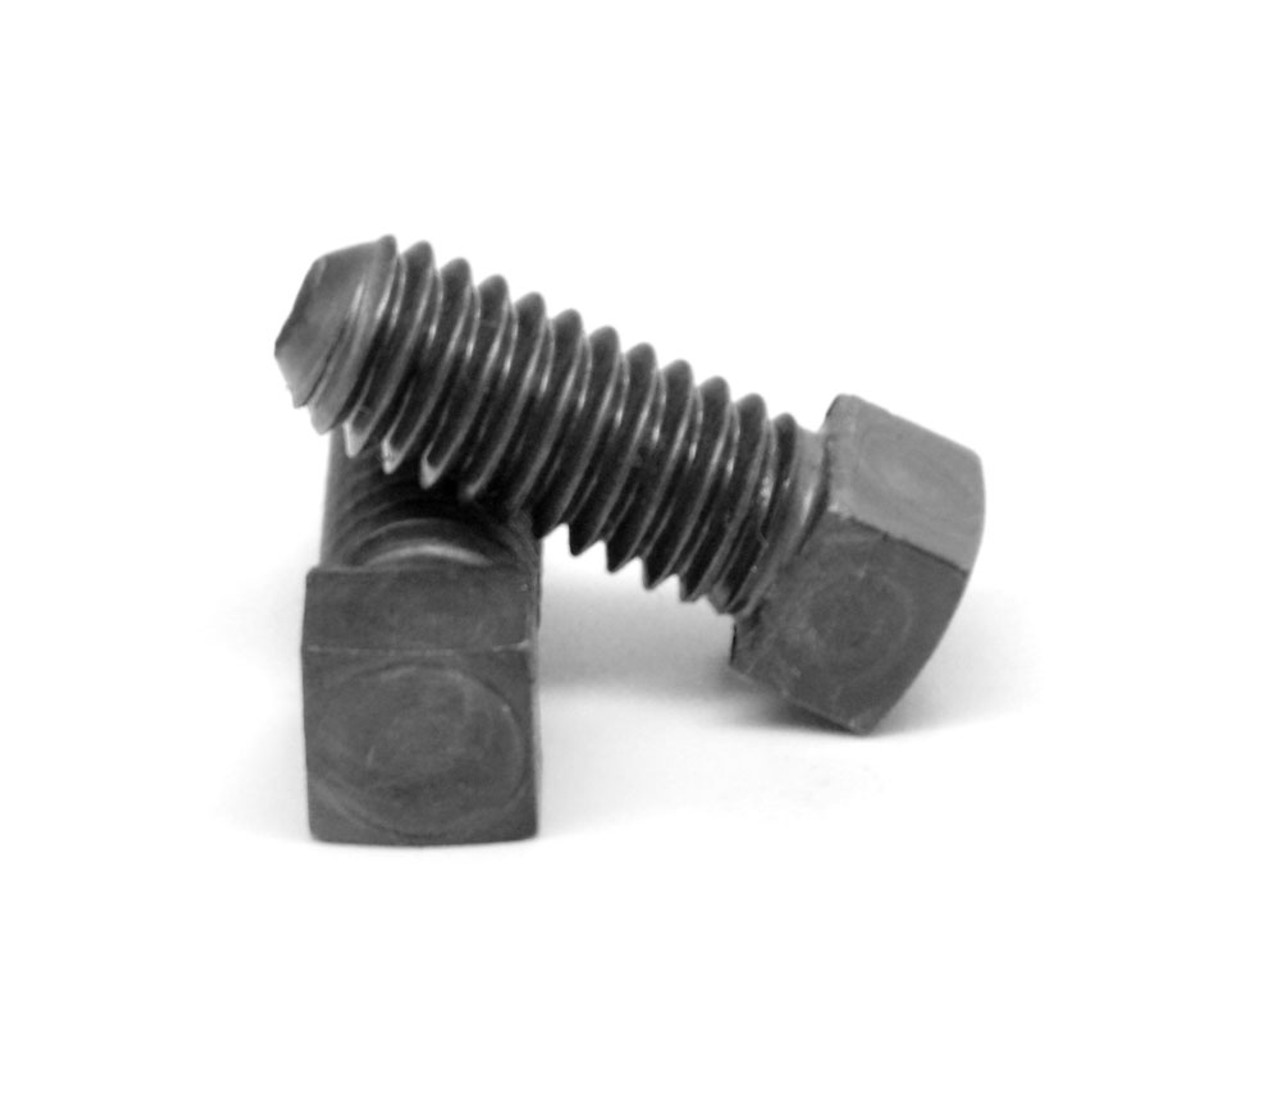 7/16"-14 x 3 1/2" (FT) Coarse Thread Square Head Set Screw Cup Point Low Carbon Steel Case Hardened Plain Finish